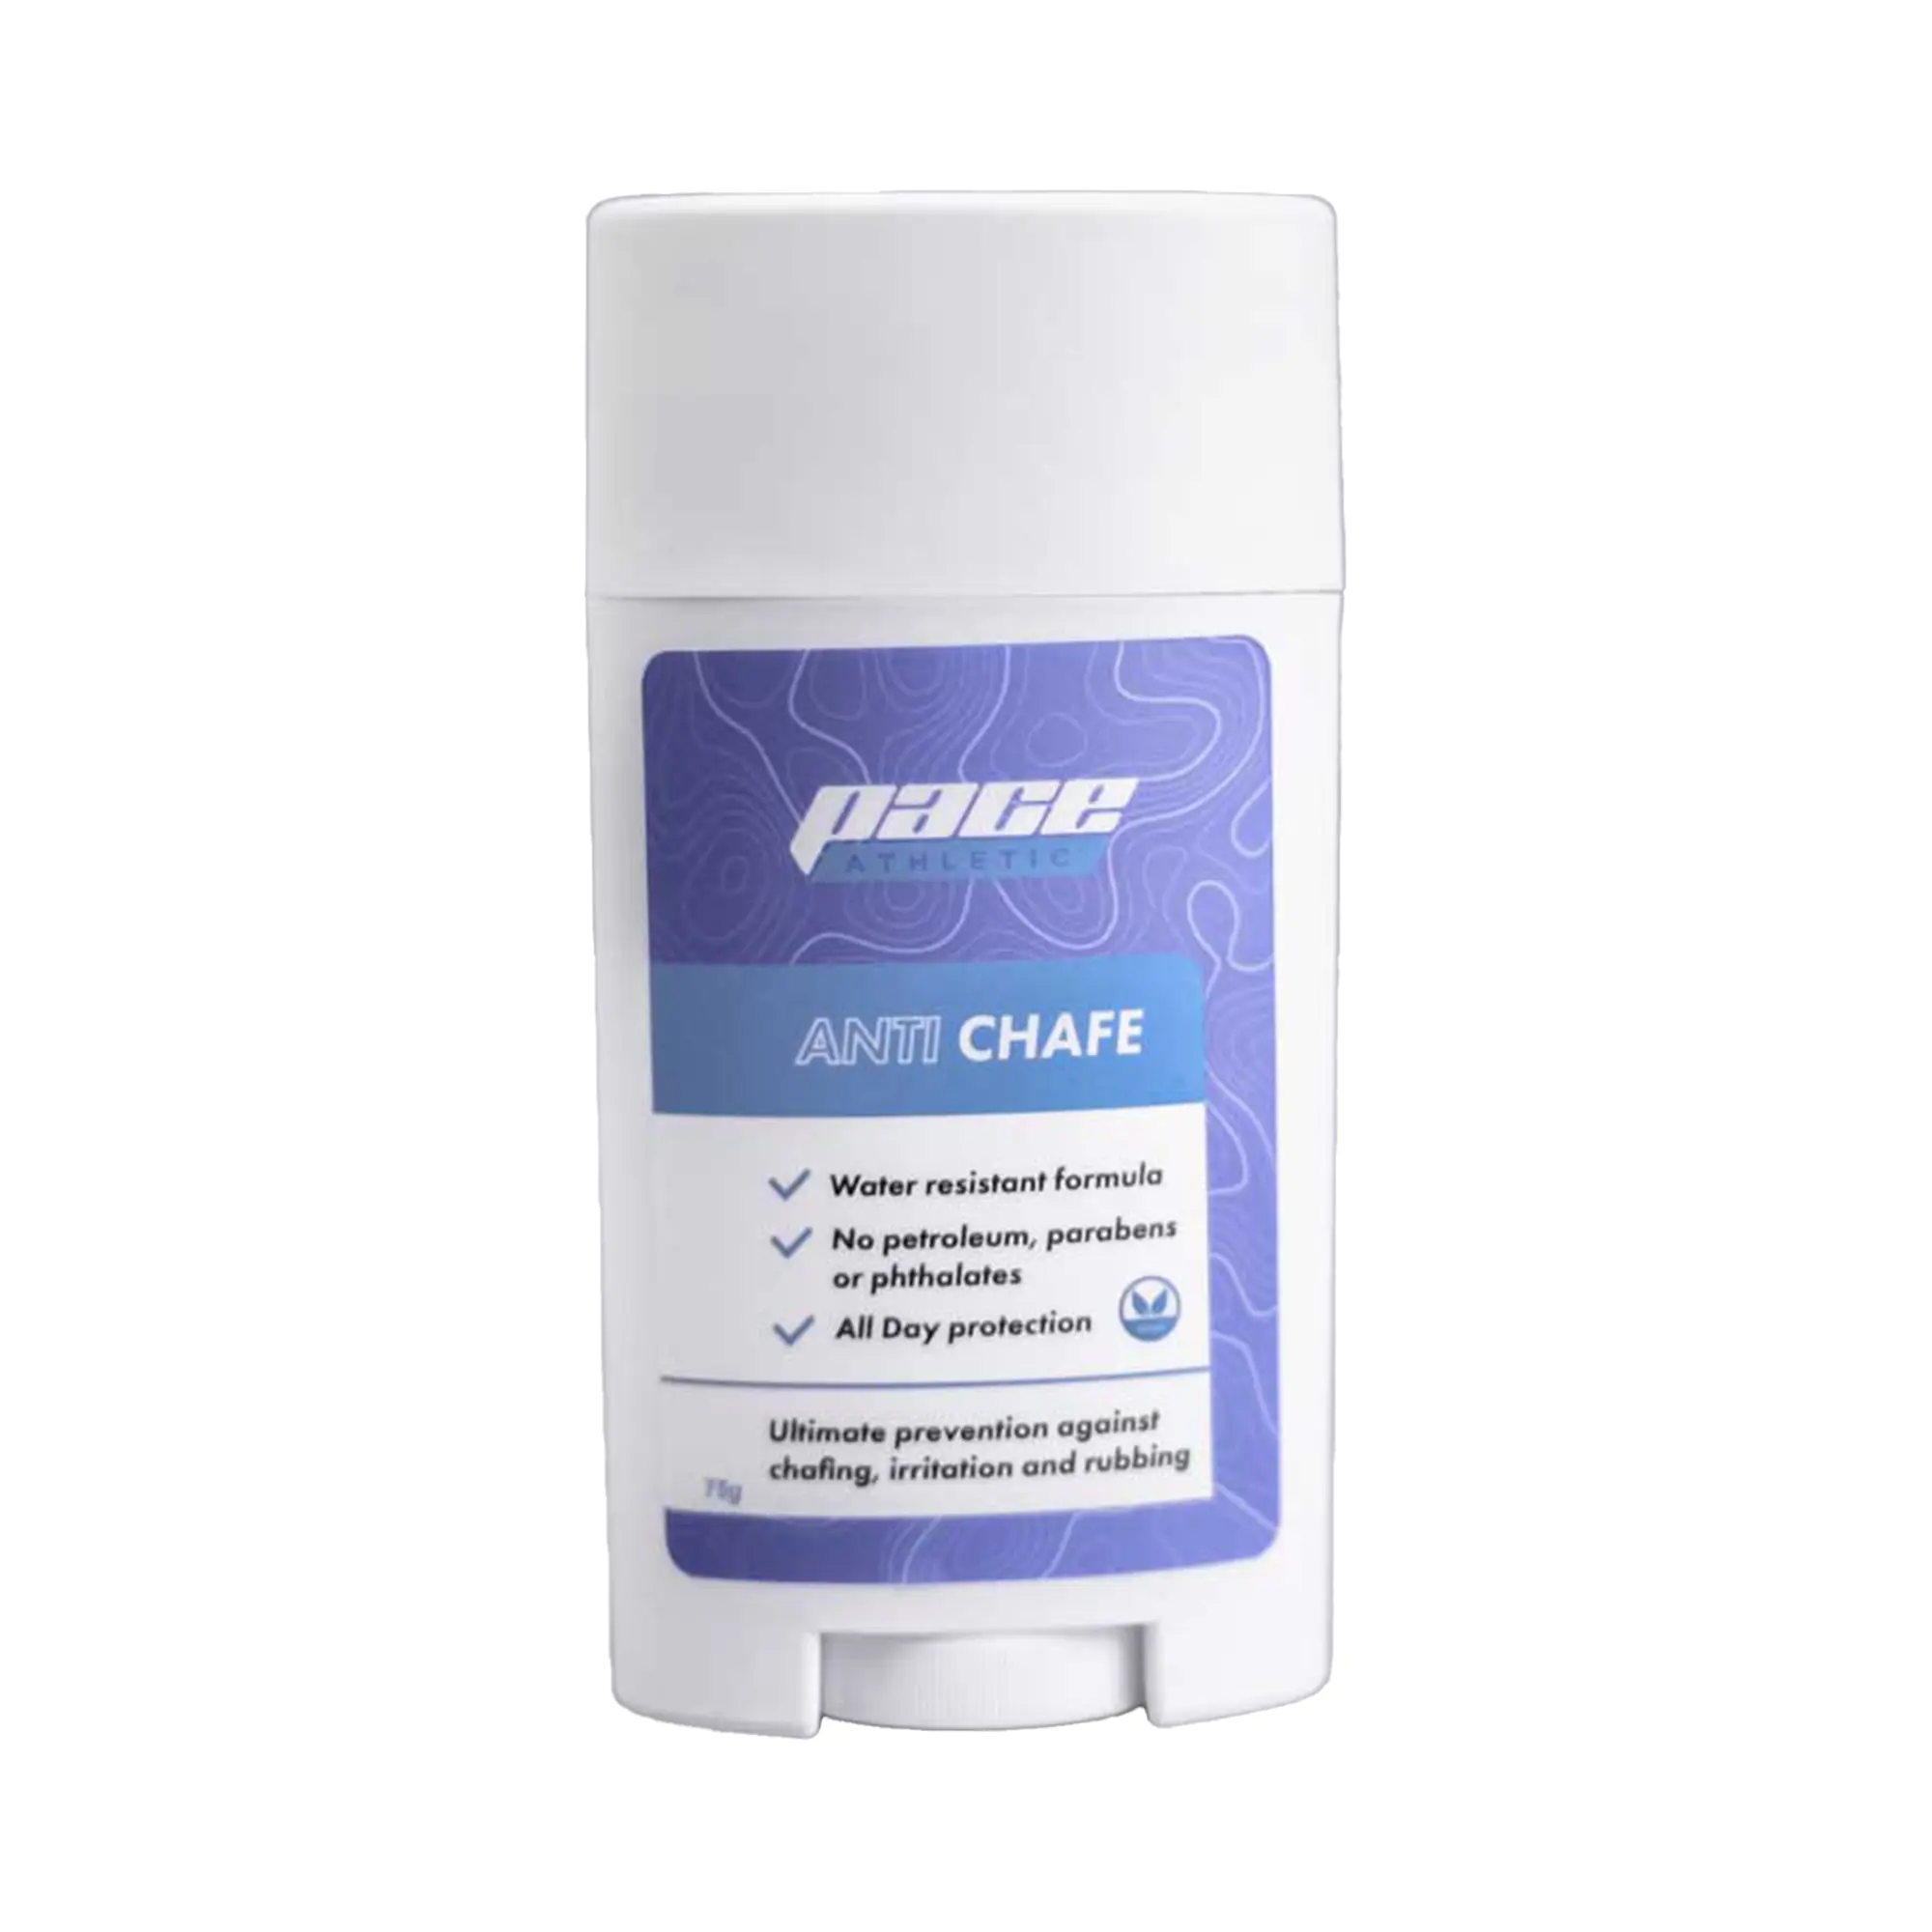 Pace Athletic Anti Chafe